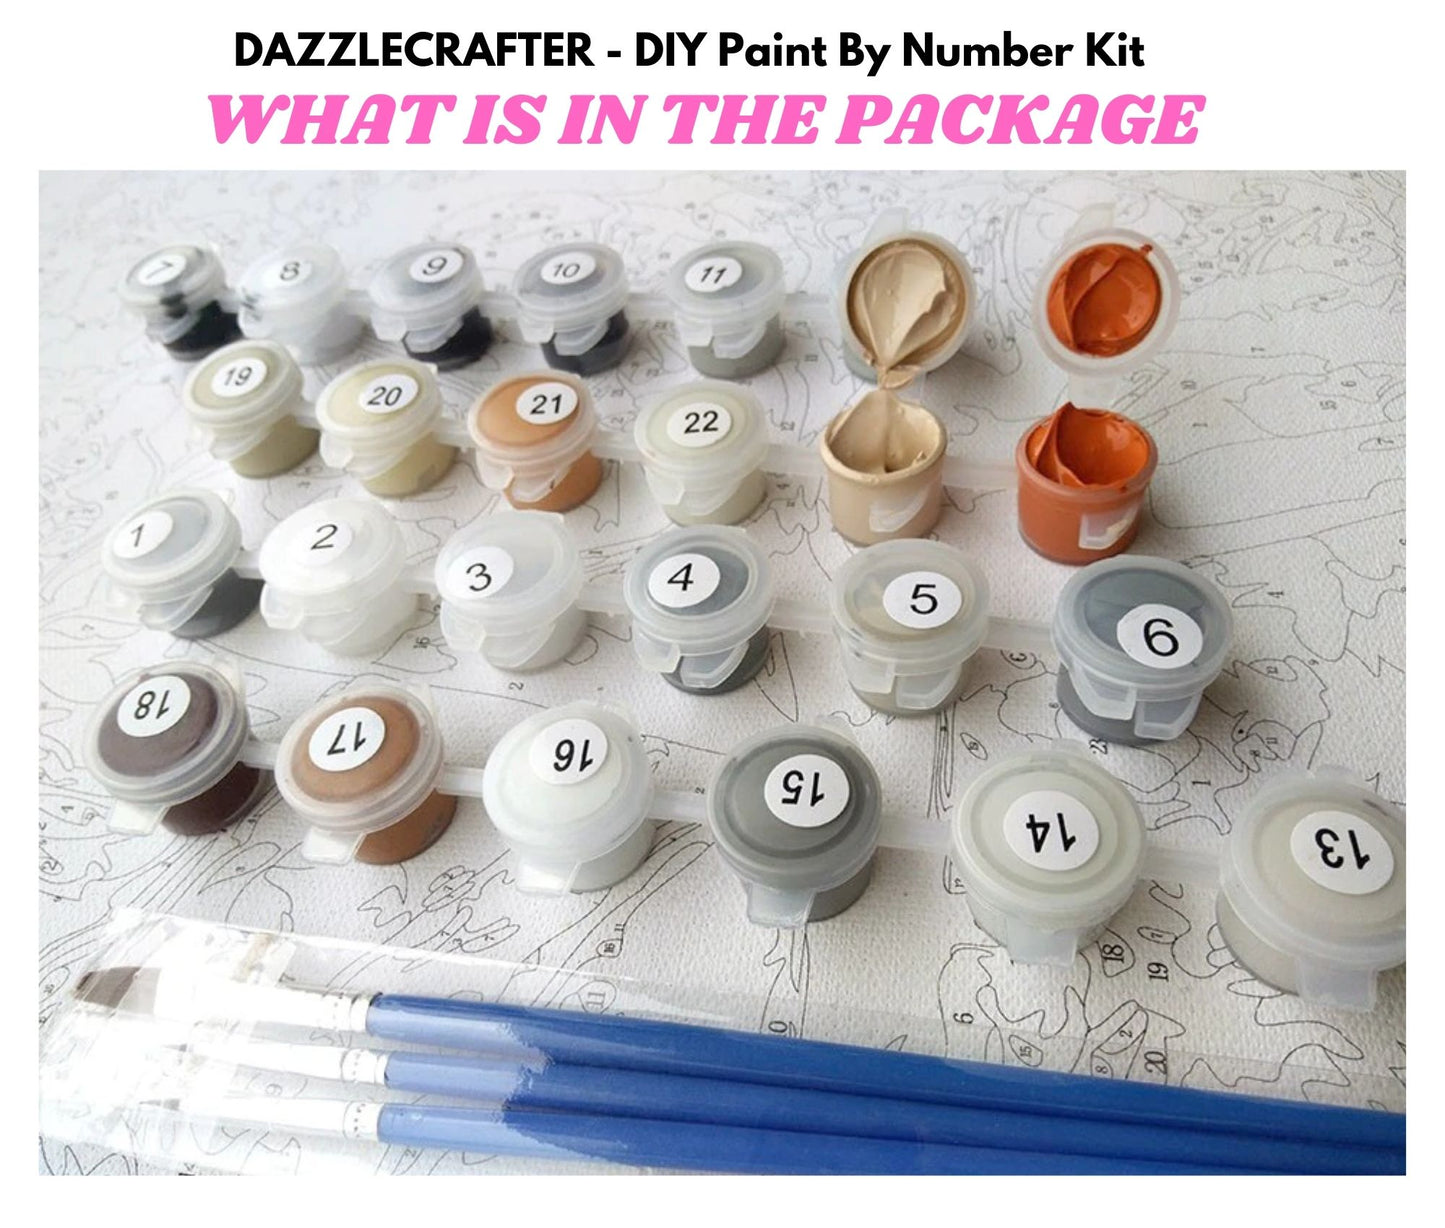 SWEET LITTLE MOUSE - DIY Adult Paint By Number Kit